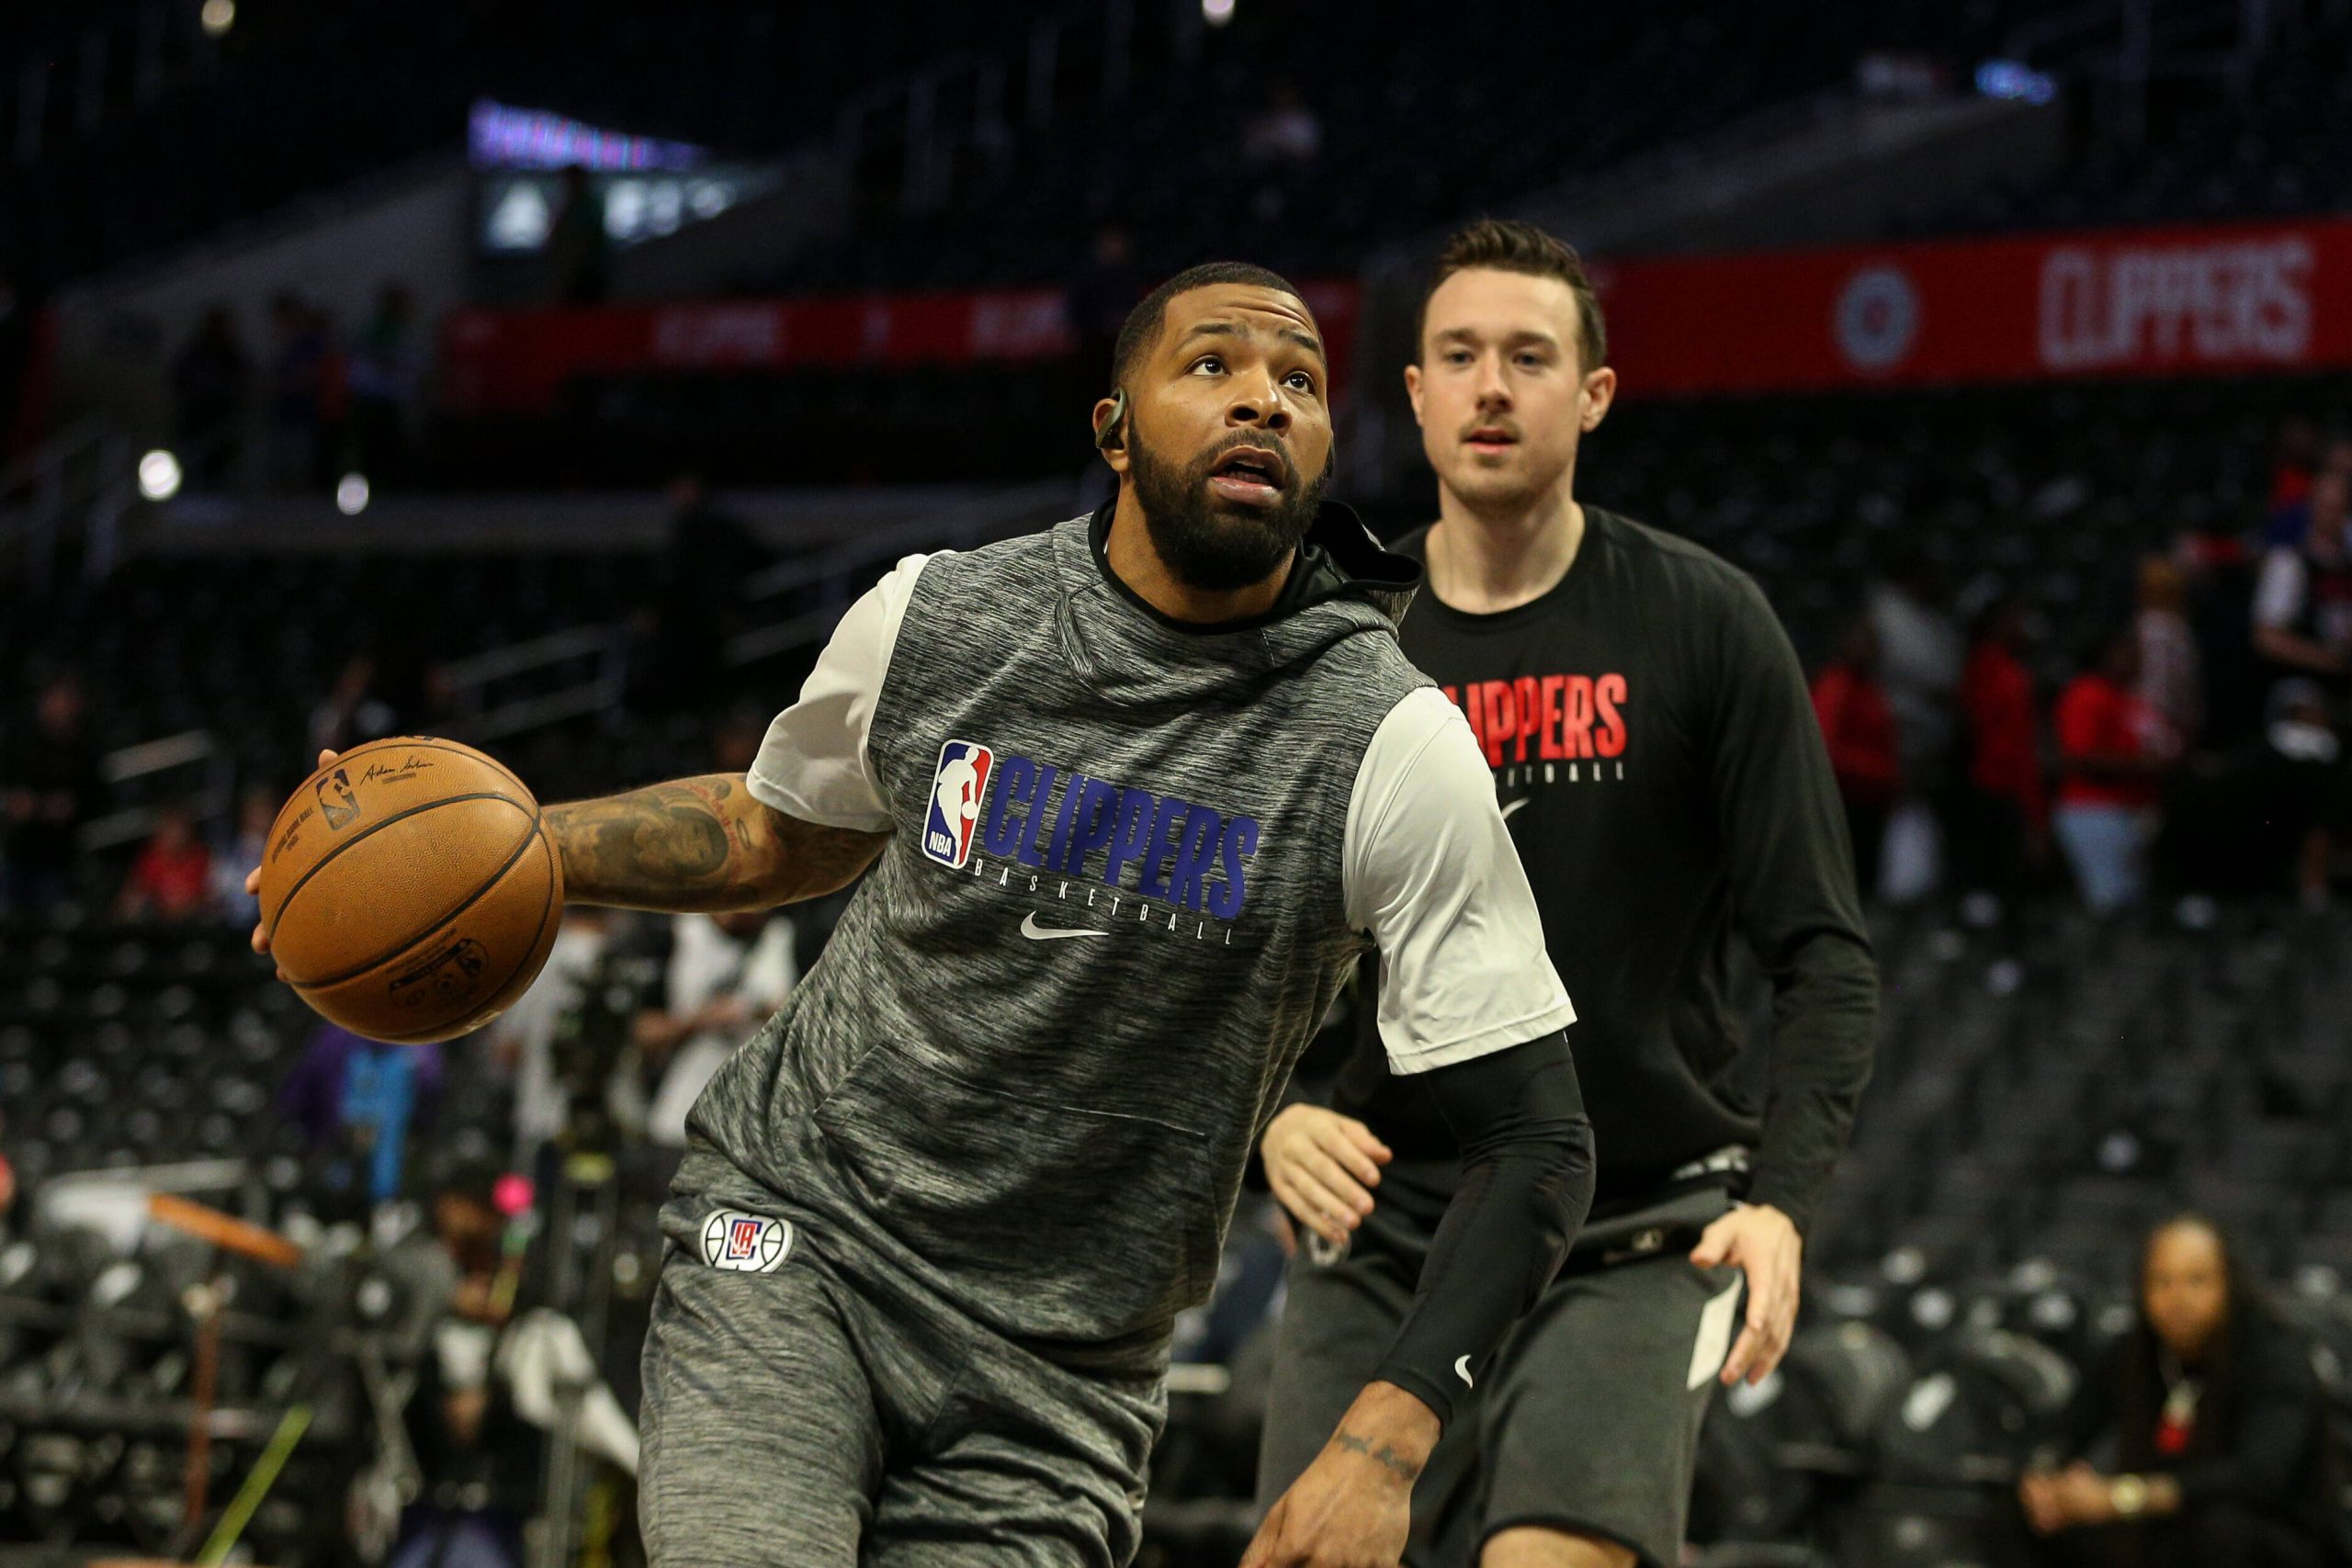 Marcus Morris bio: brother, age, wife, clippers, net worth, beefs